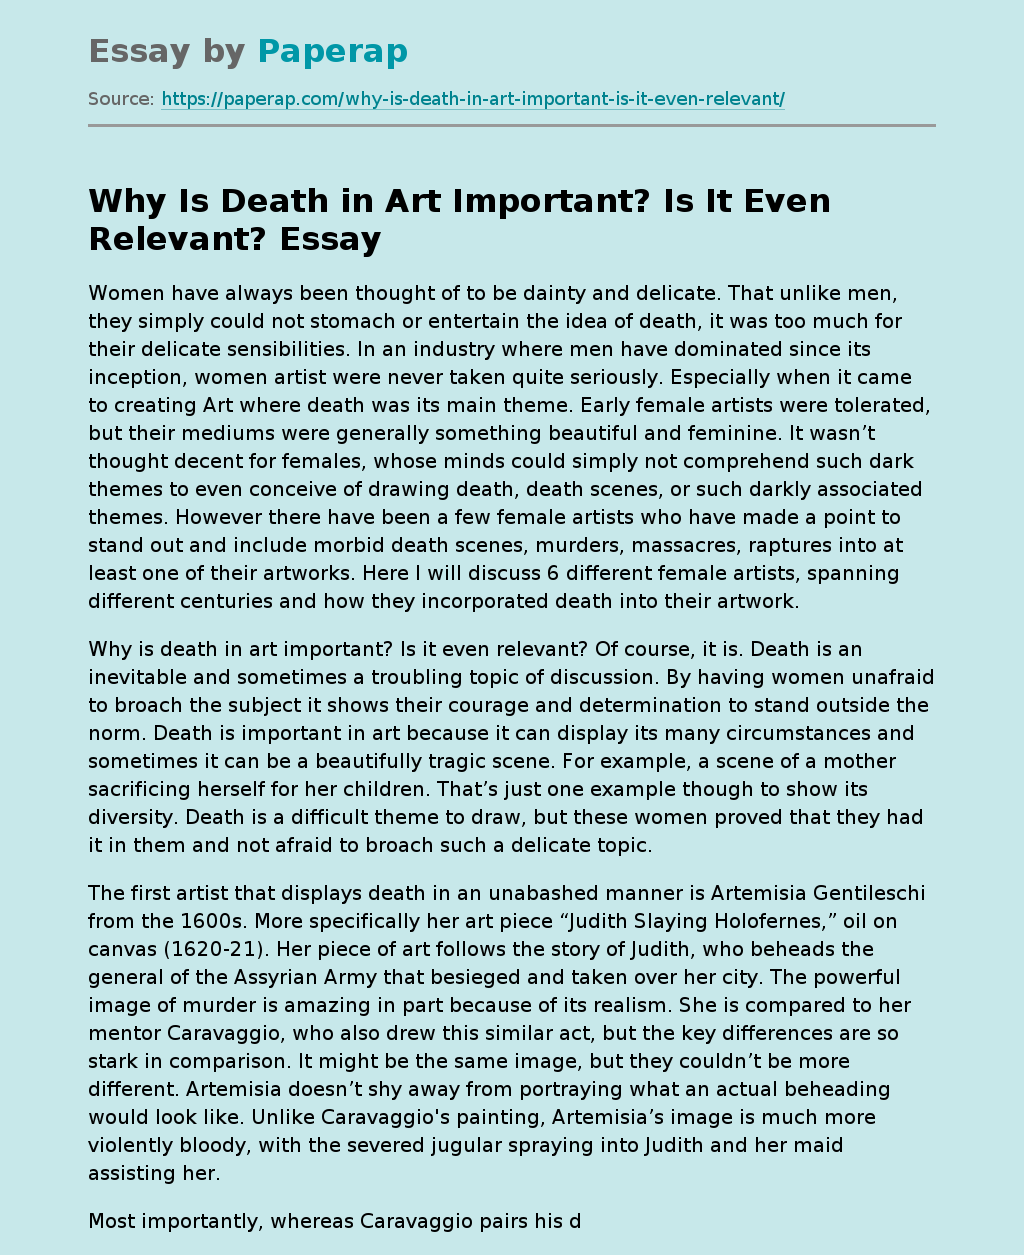 Why Is Death in Art Important? Is It Even Relevant?